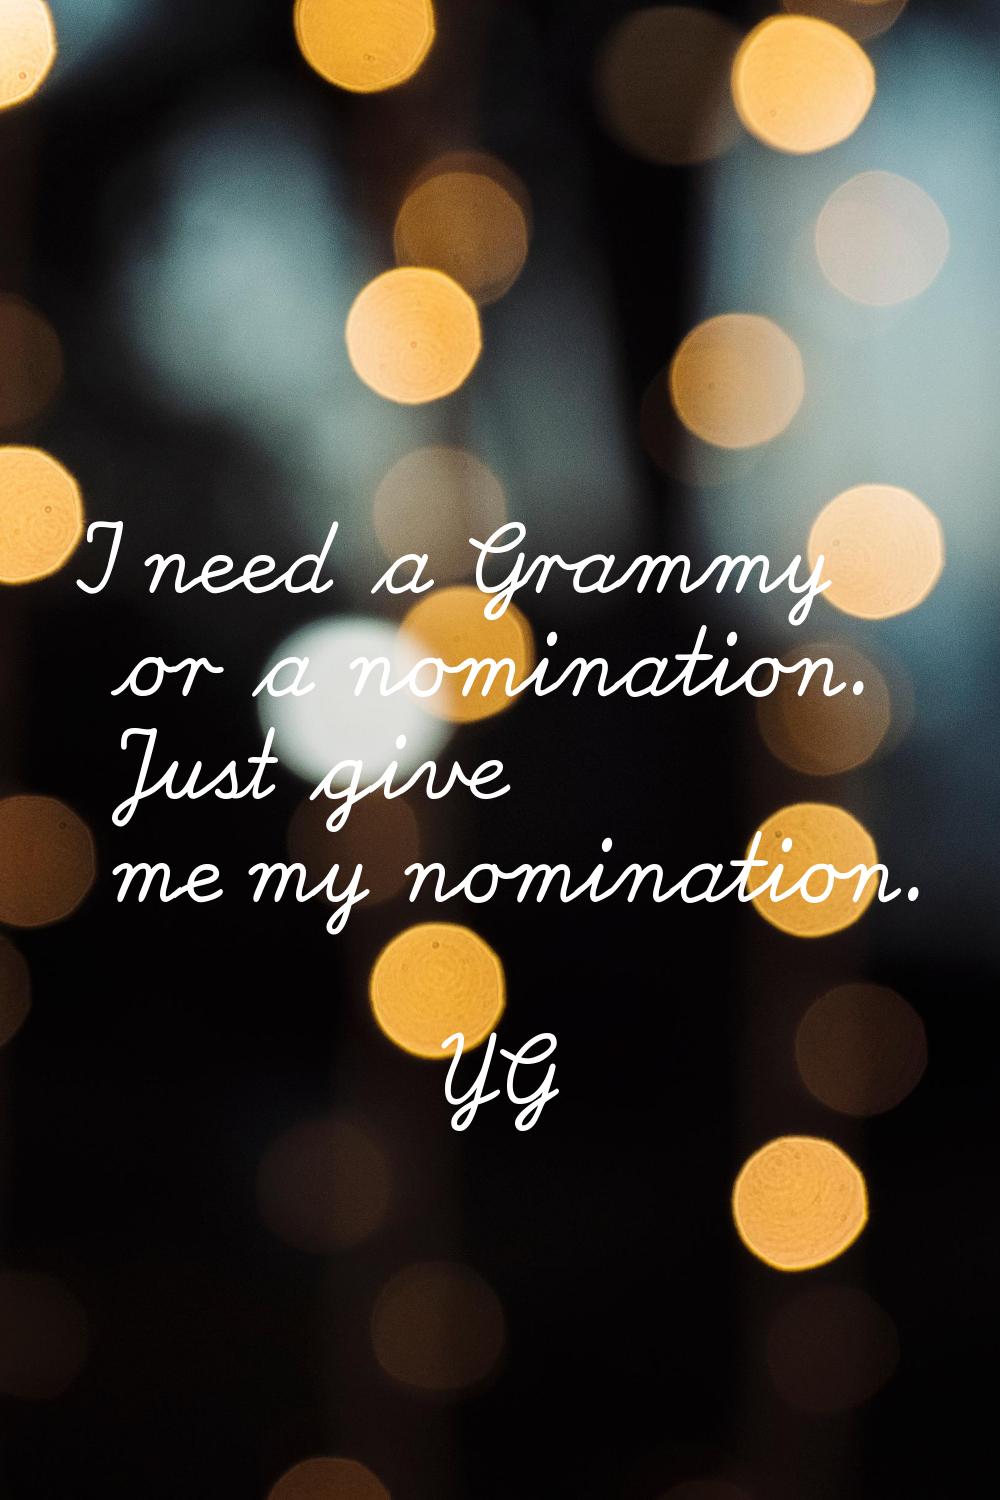 I need a Grammy or a nomination. Just give me my nomination.